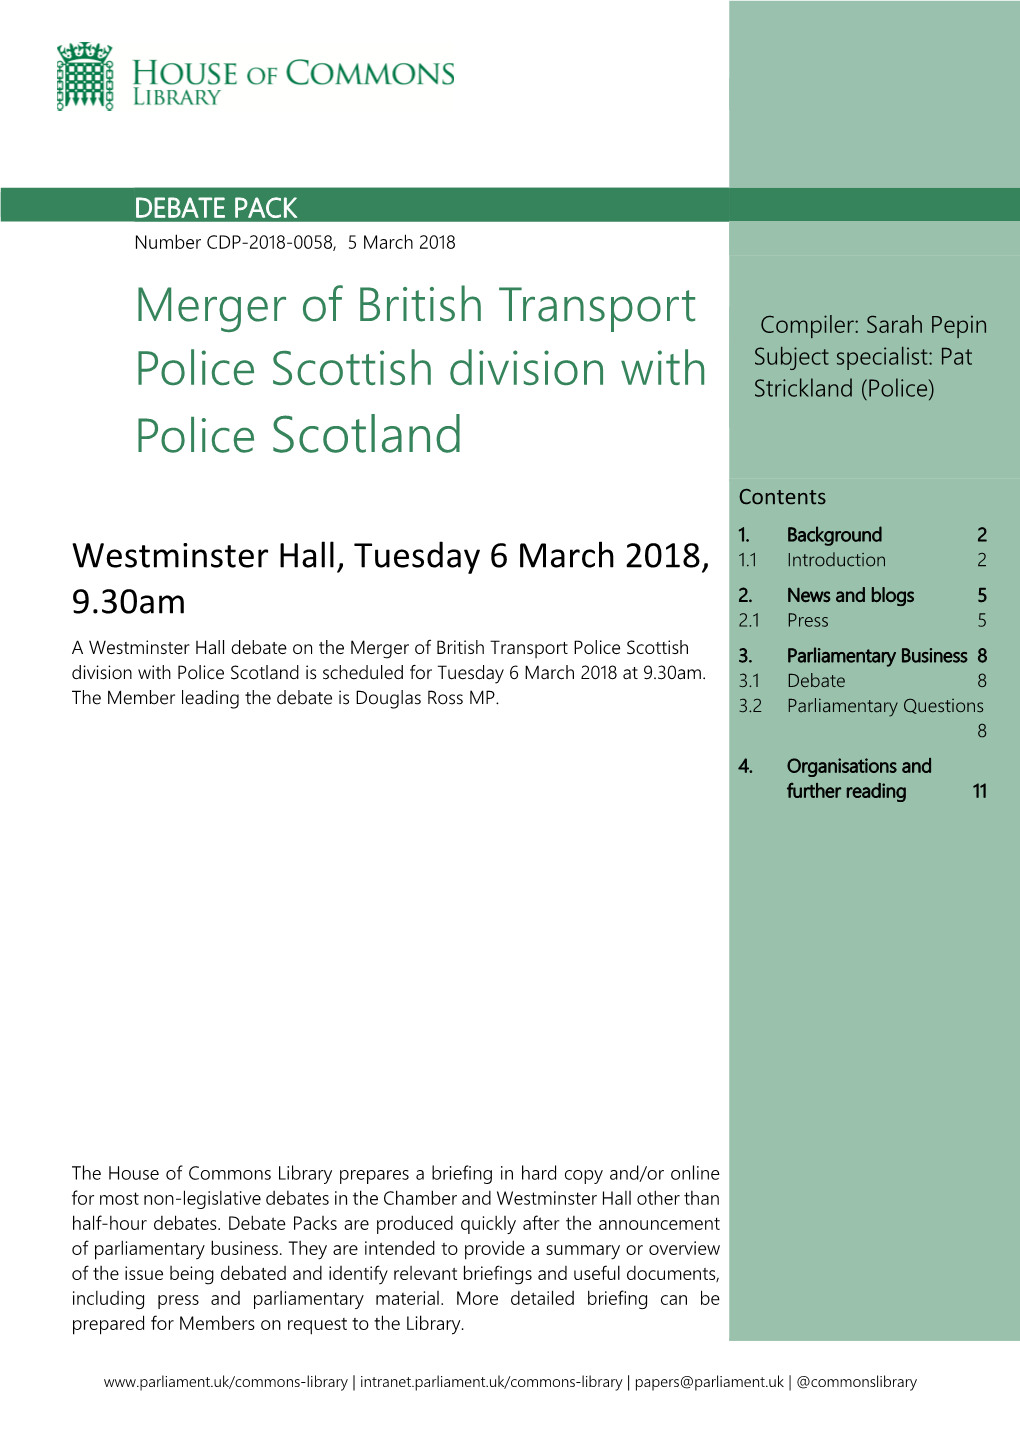 Merger of British Transport Police Scottish Division with Police Scotland 3